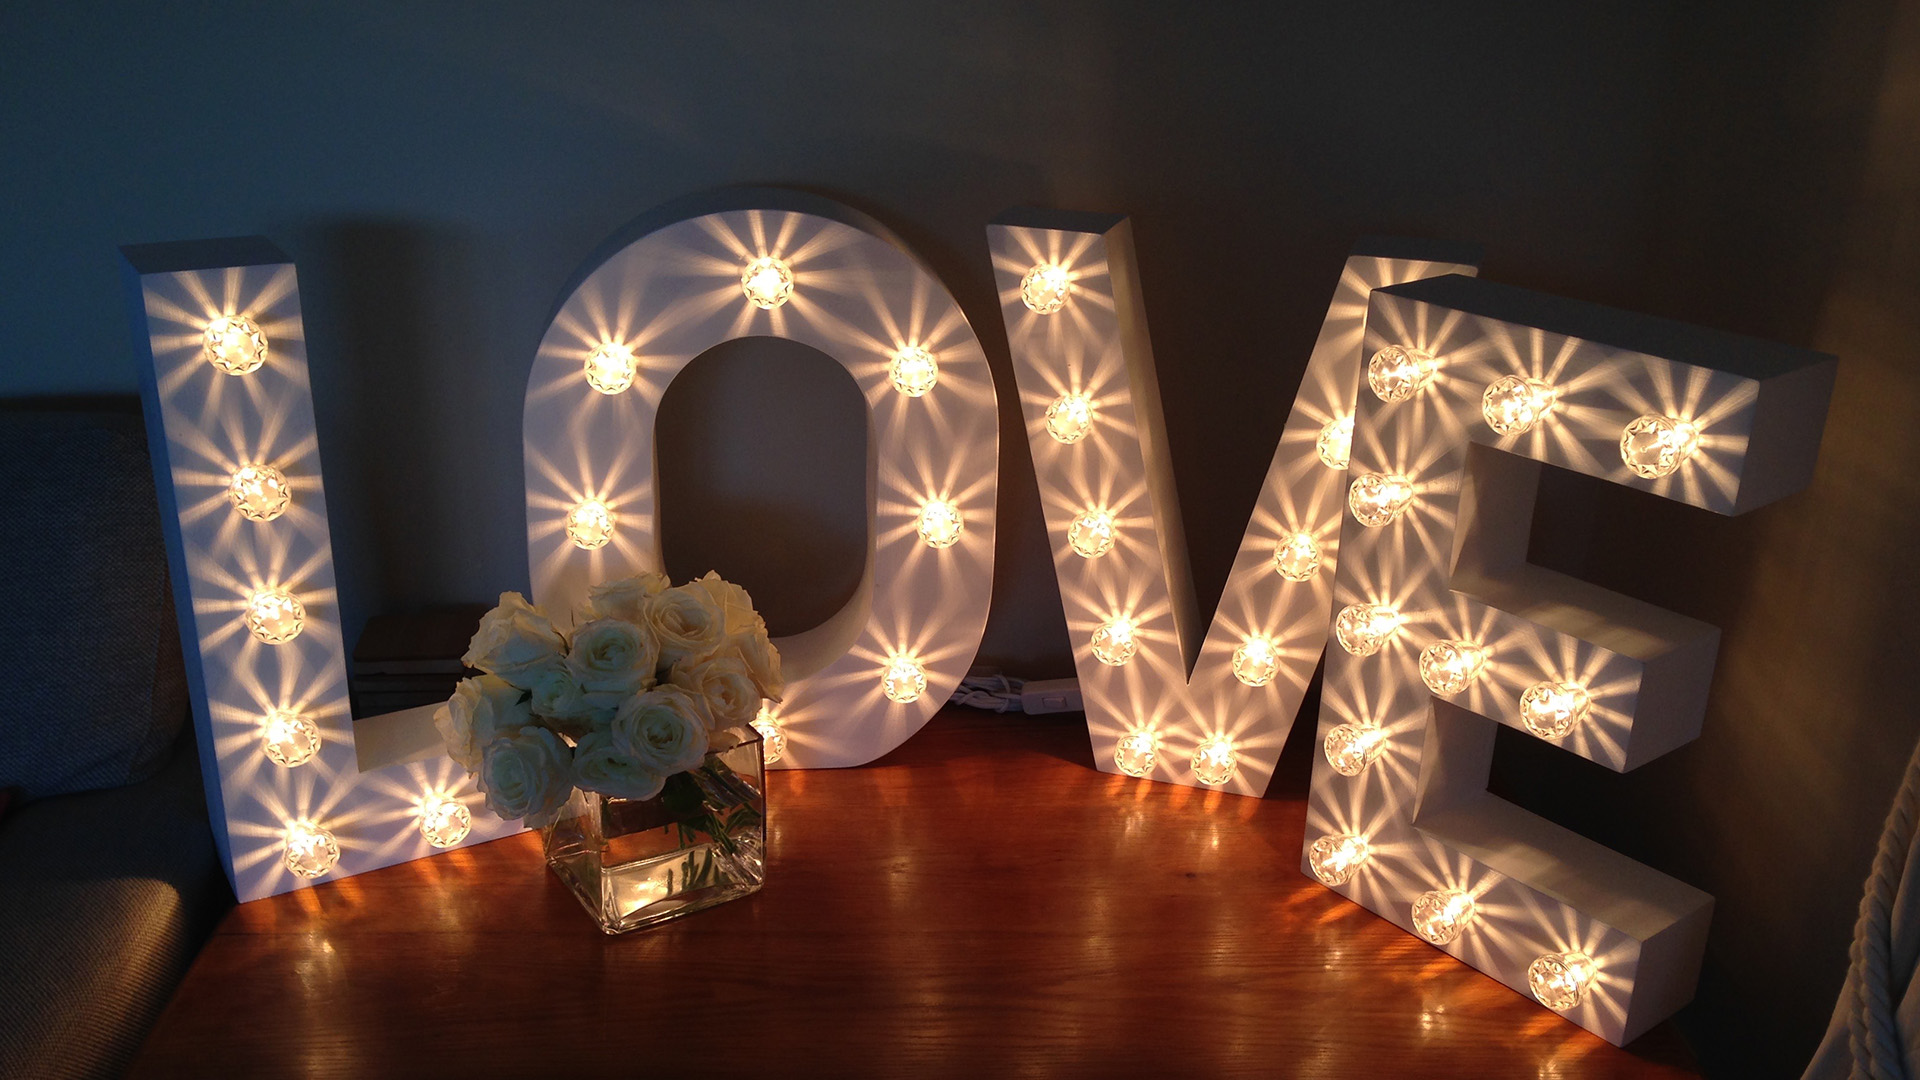 Written In Lights: Beautiful Light Up Letters Hire + Hearts & Shapes for for Weddings & Events